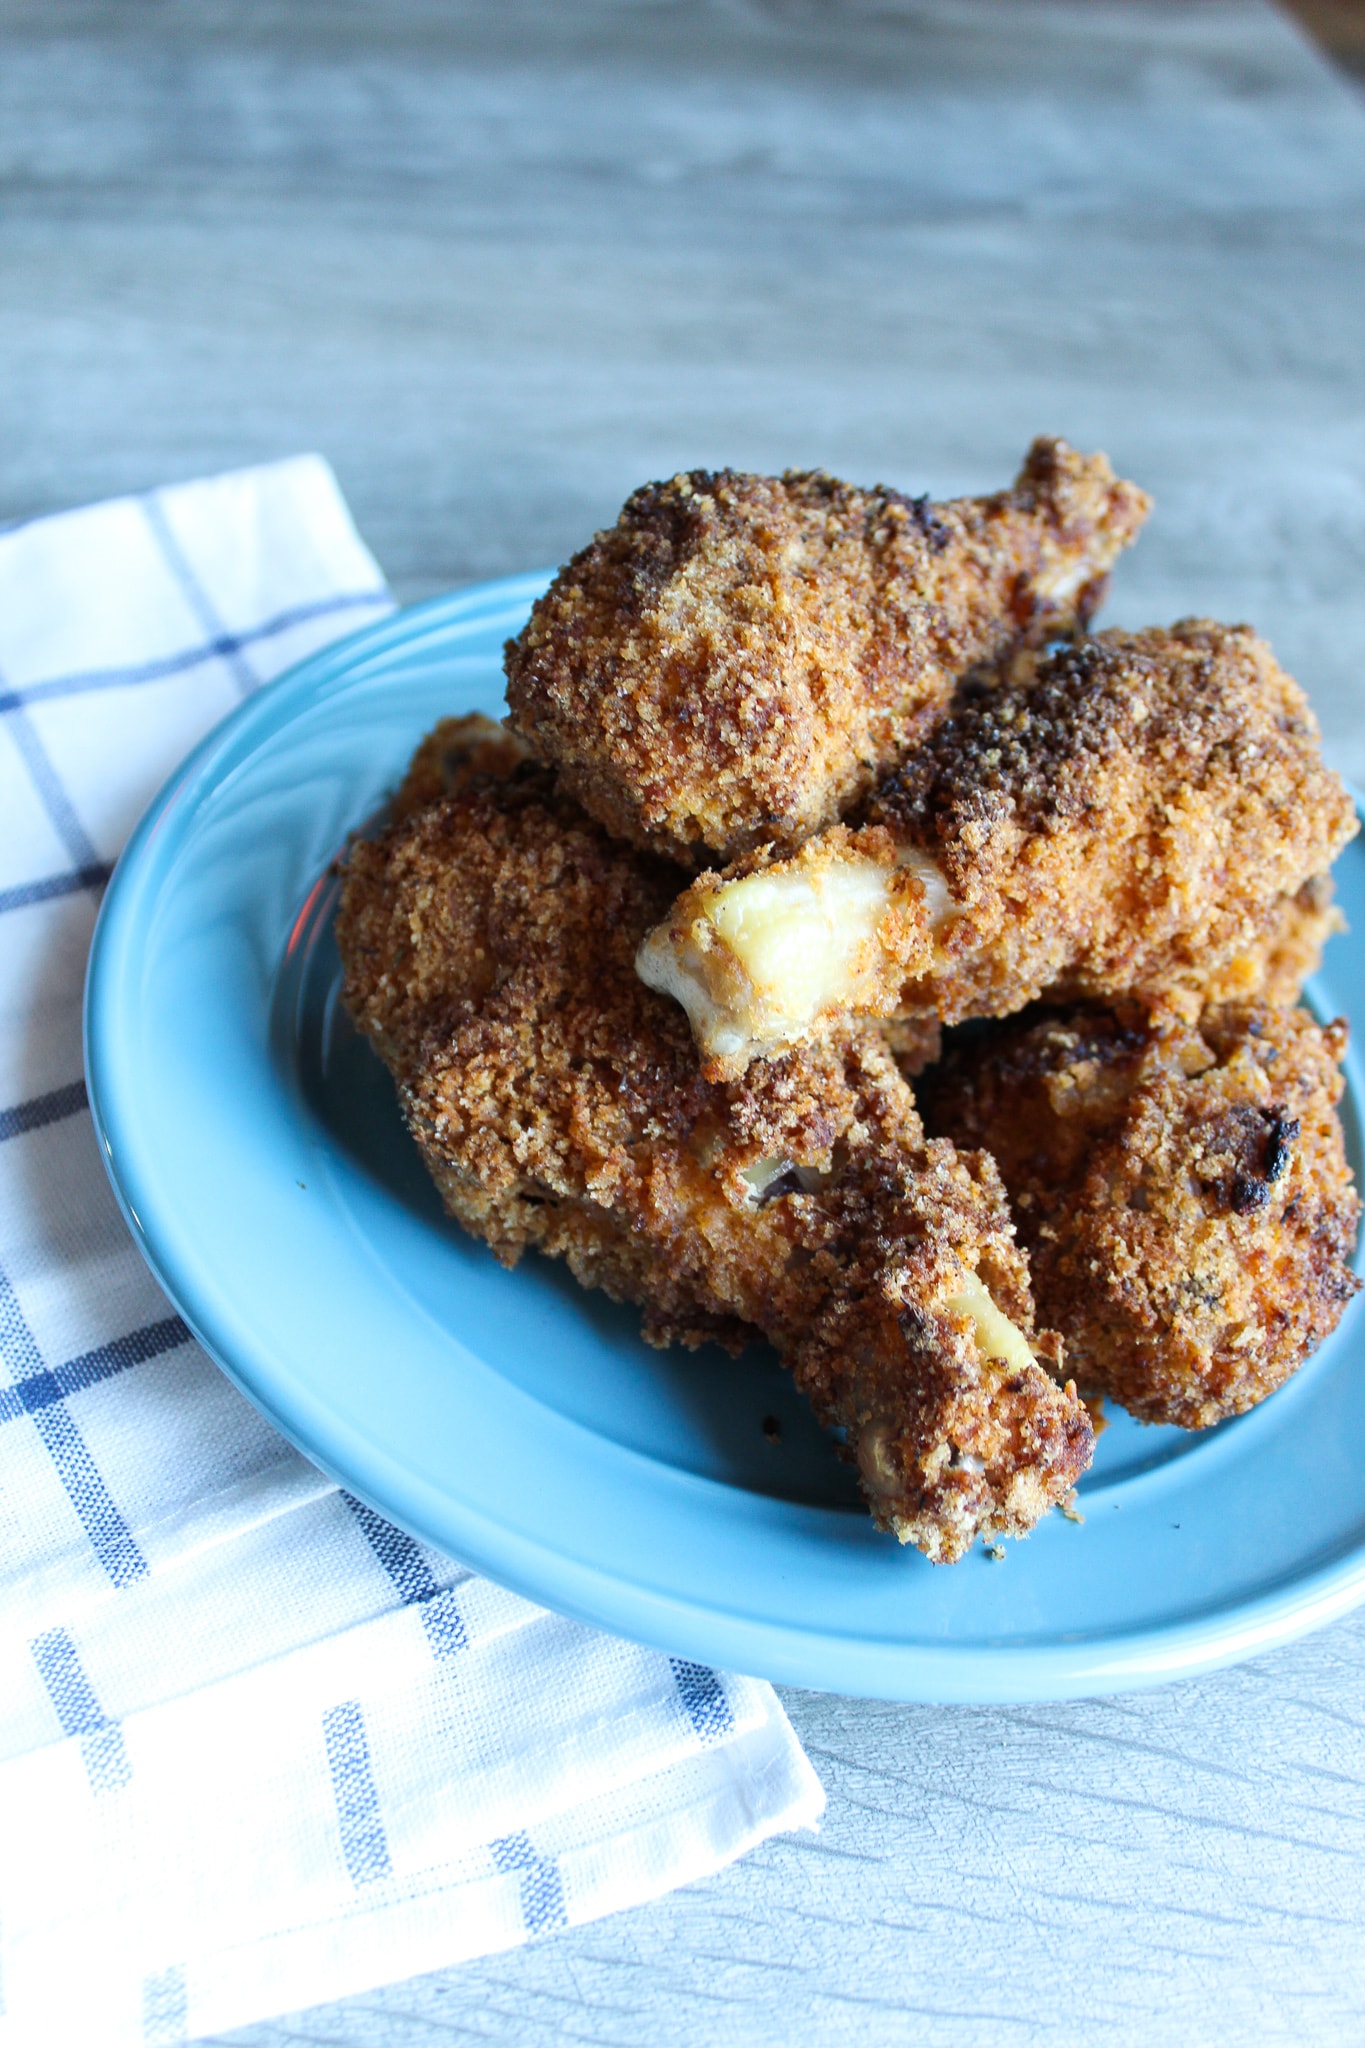 Keto Fried Chicken is super easy to make using ingredients you probably already have on hand! 